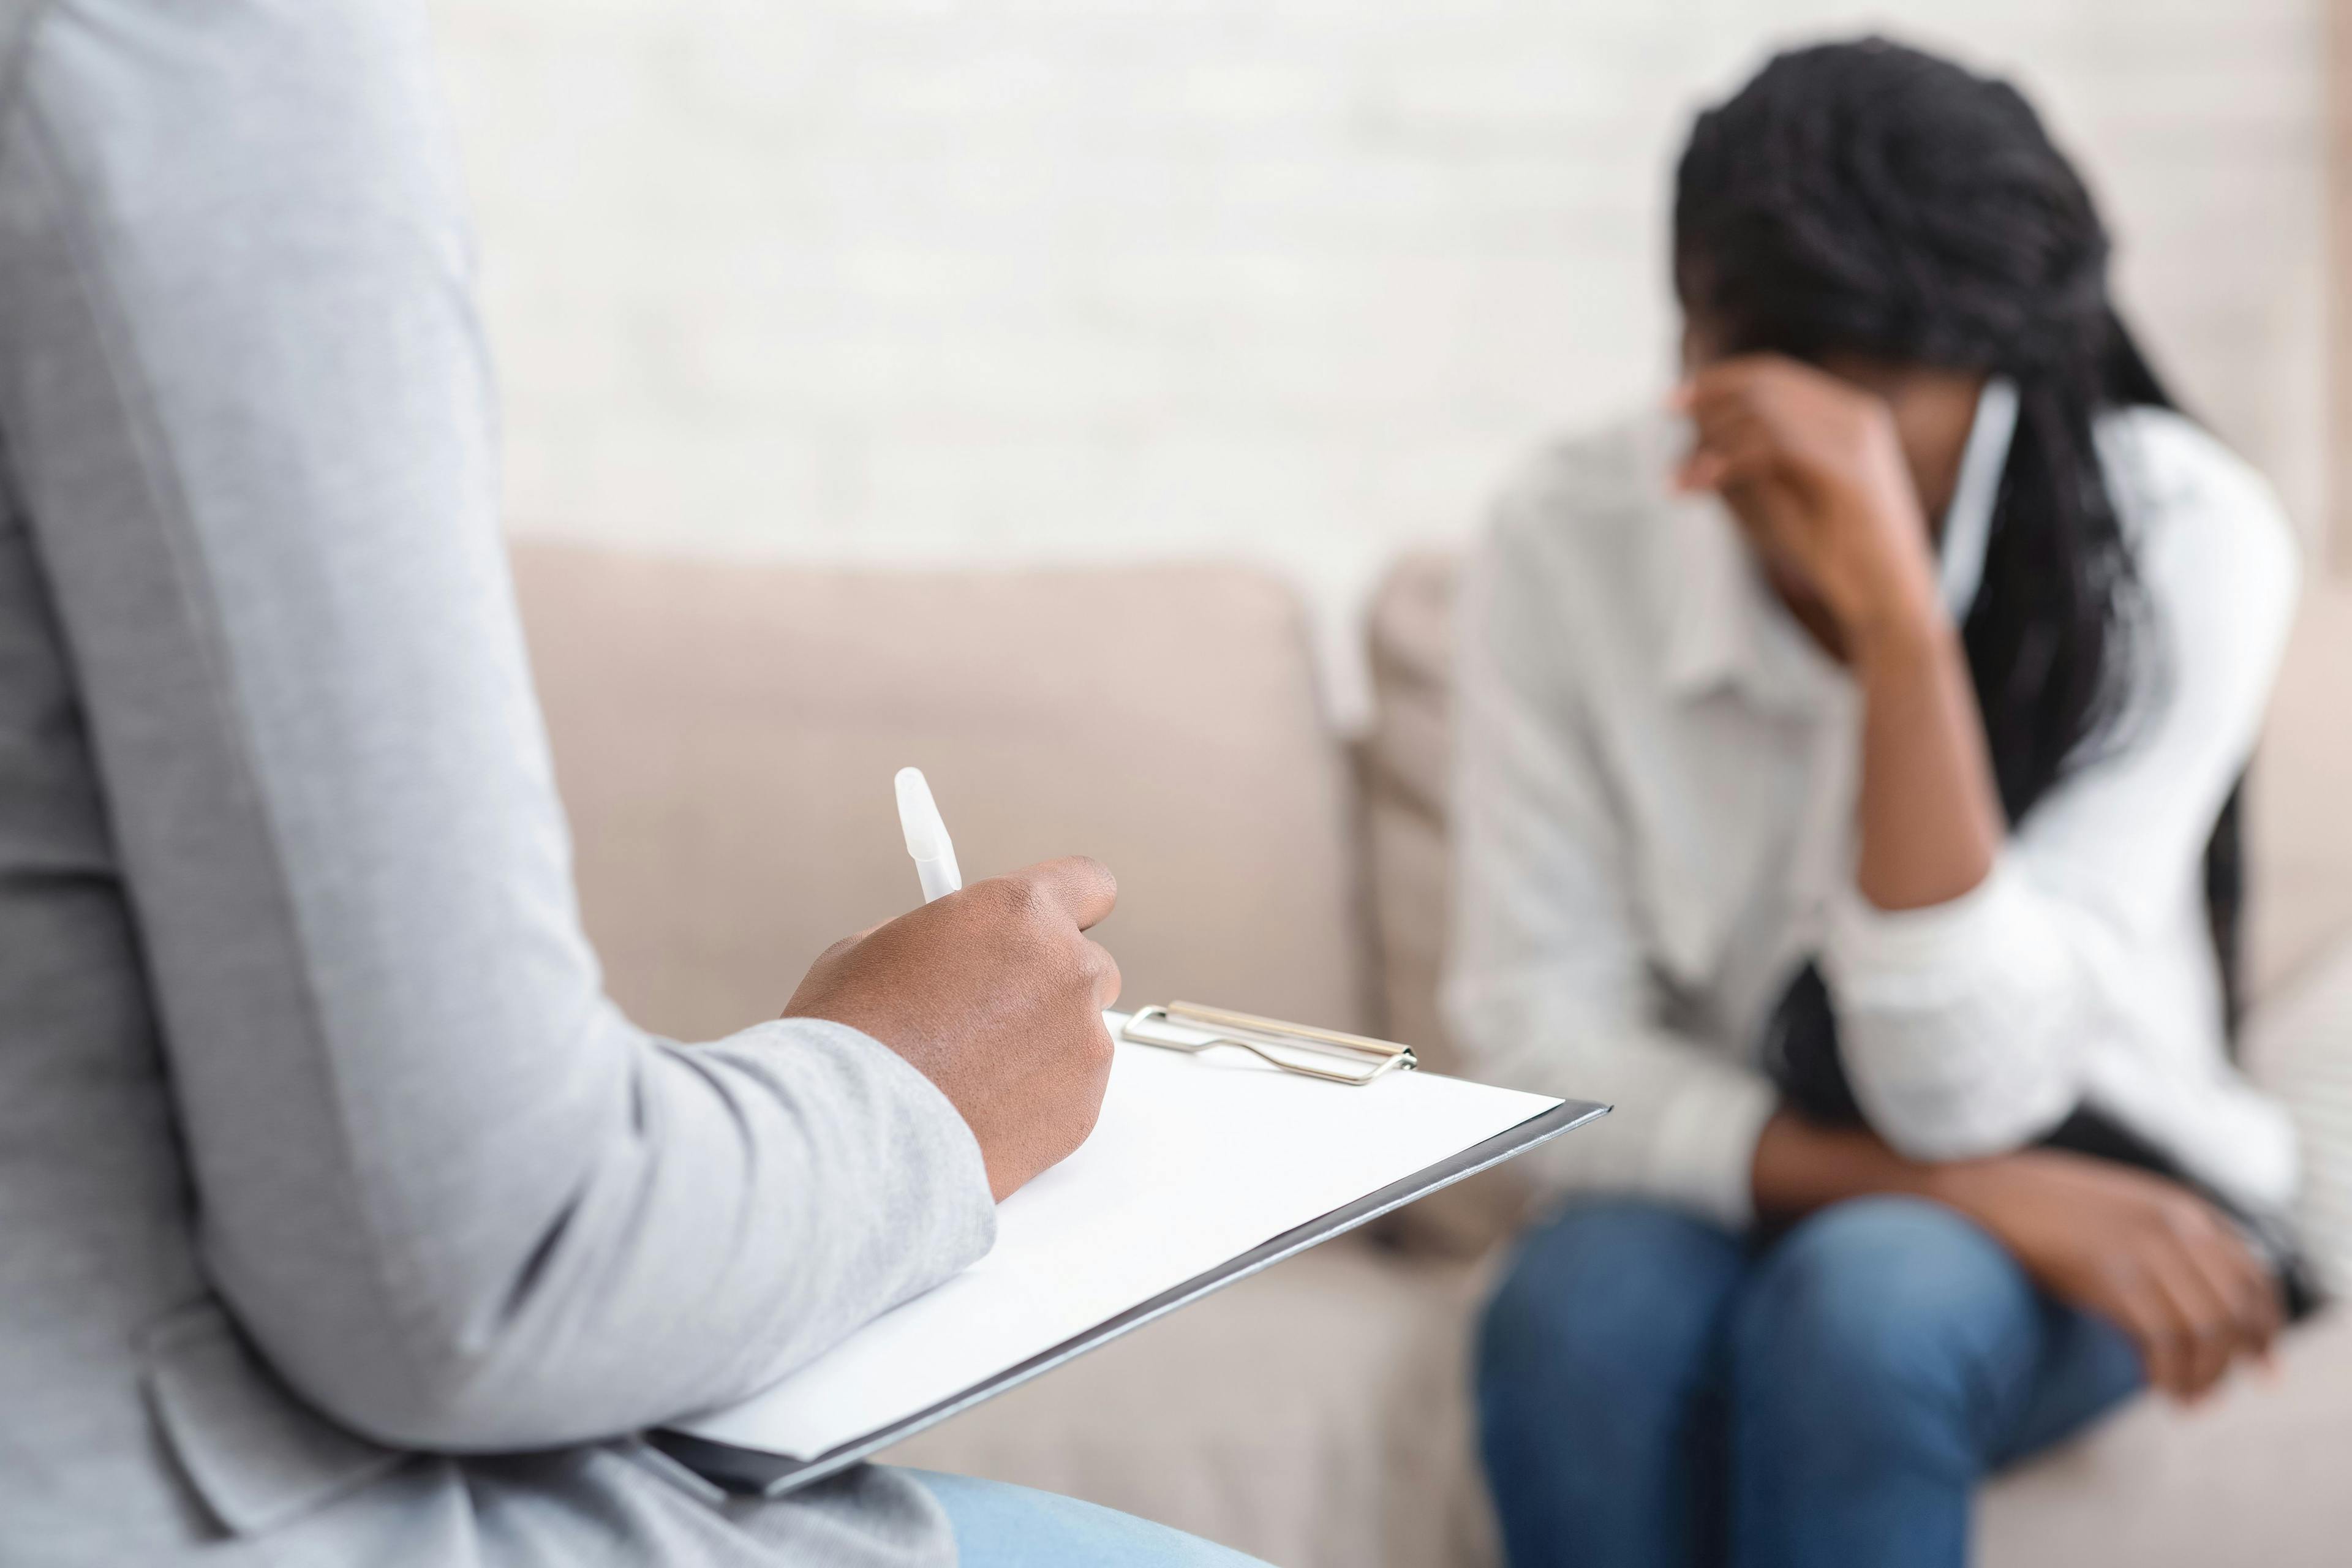 Study Examines Suicide Attempts and Use of Mental Health Services